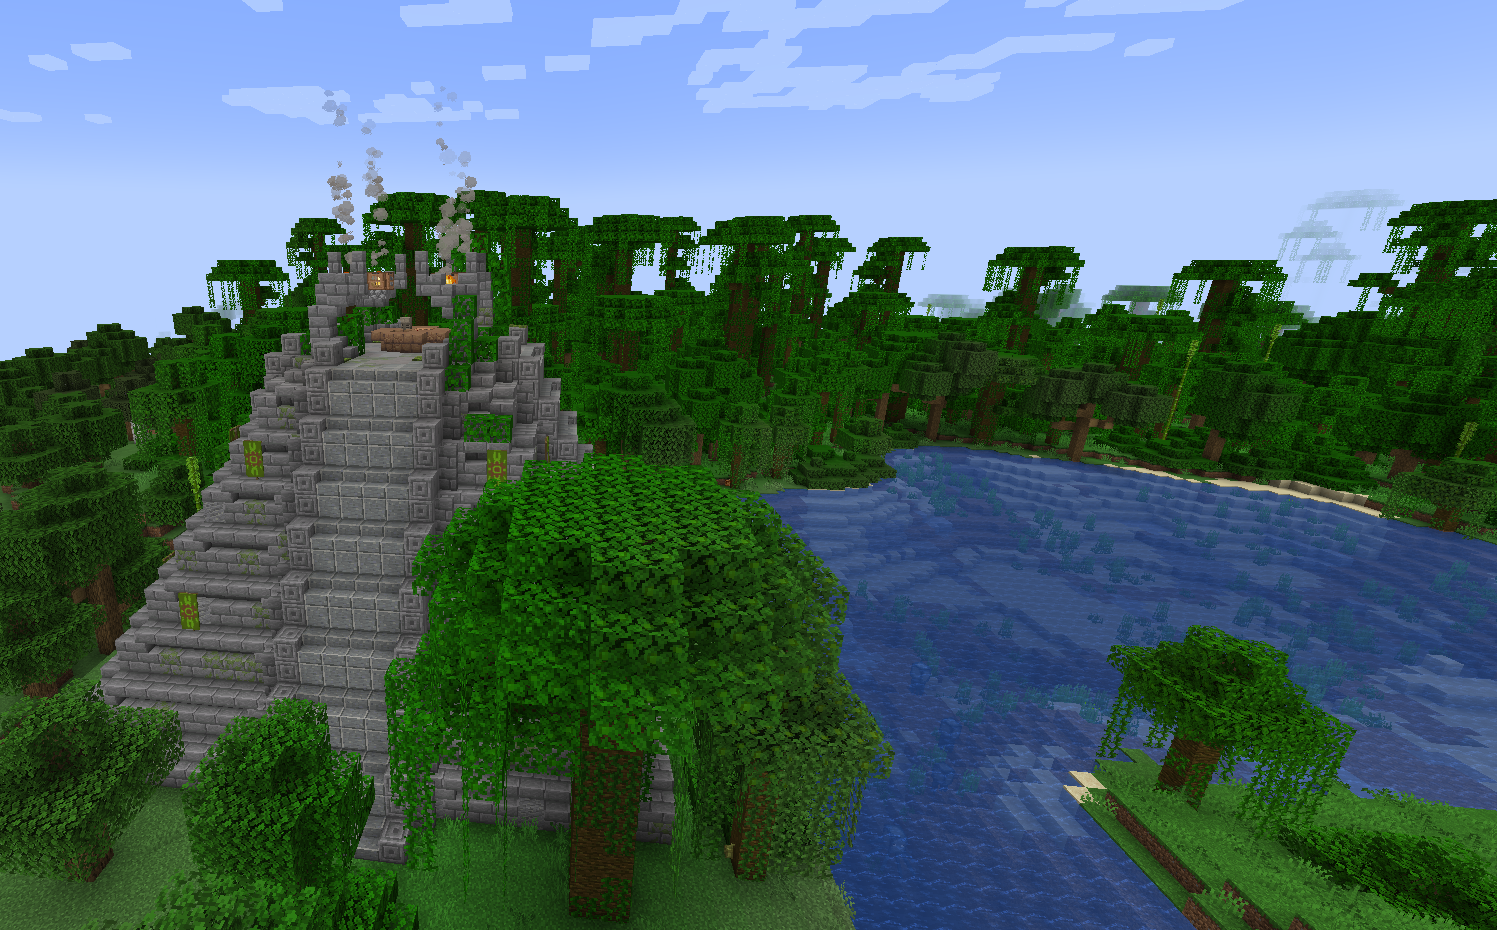 This structure contains a lot of loot and adventure to seek!